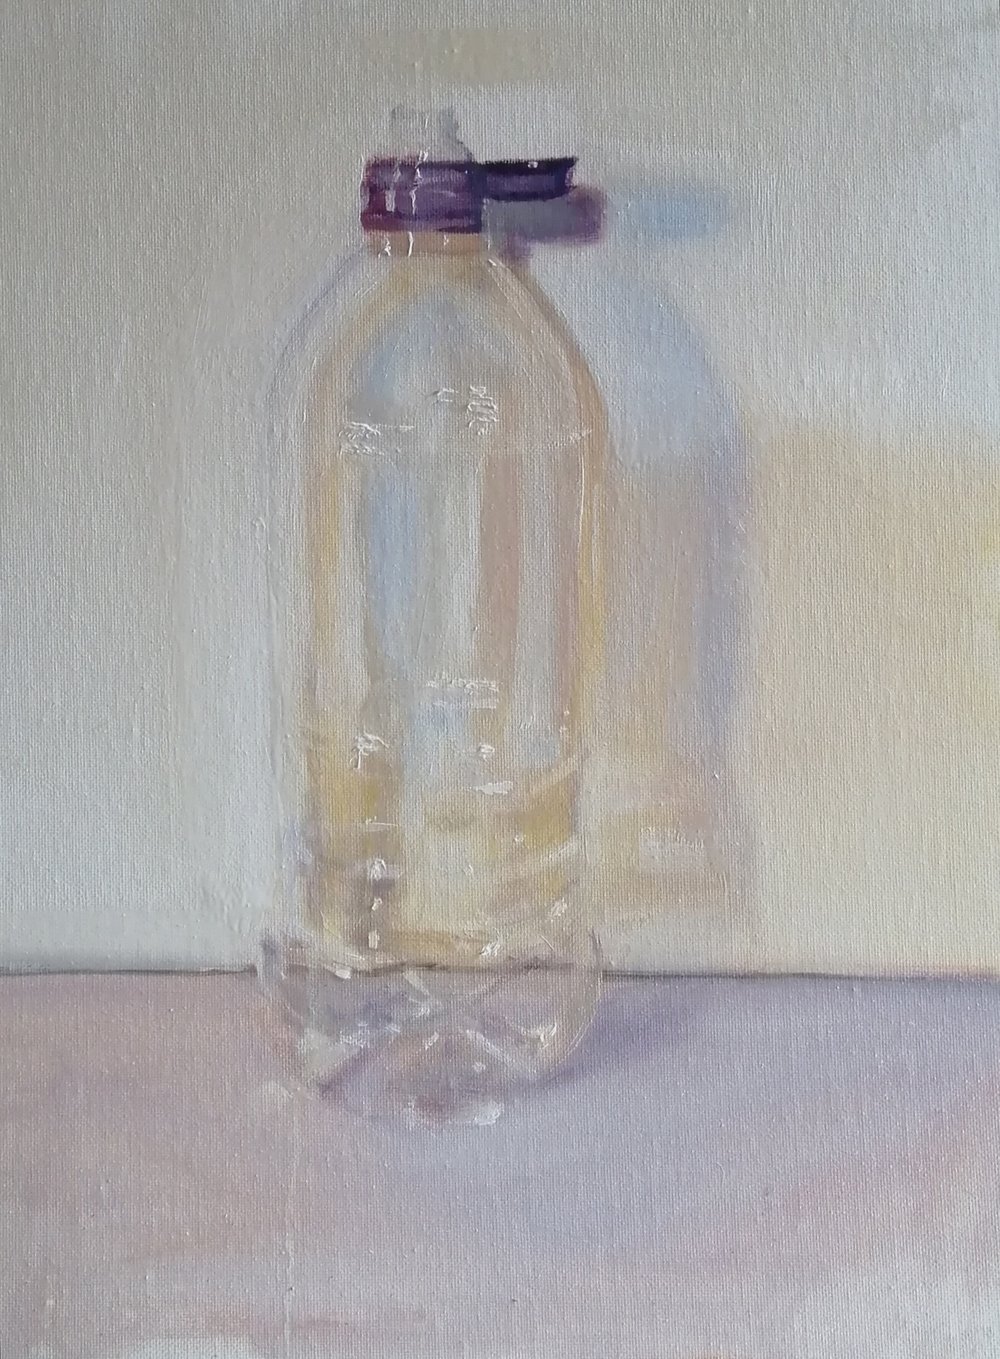  Recycling  Oil on board  30x40cm  not currently available 